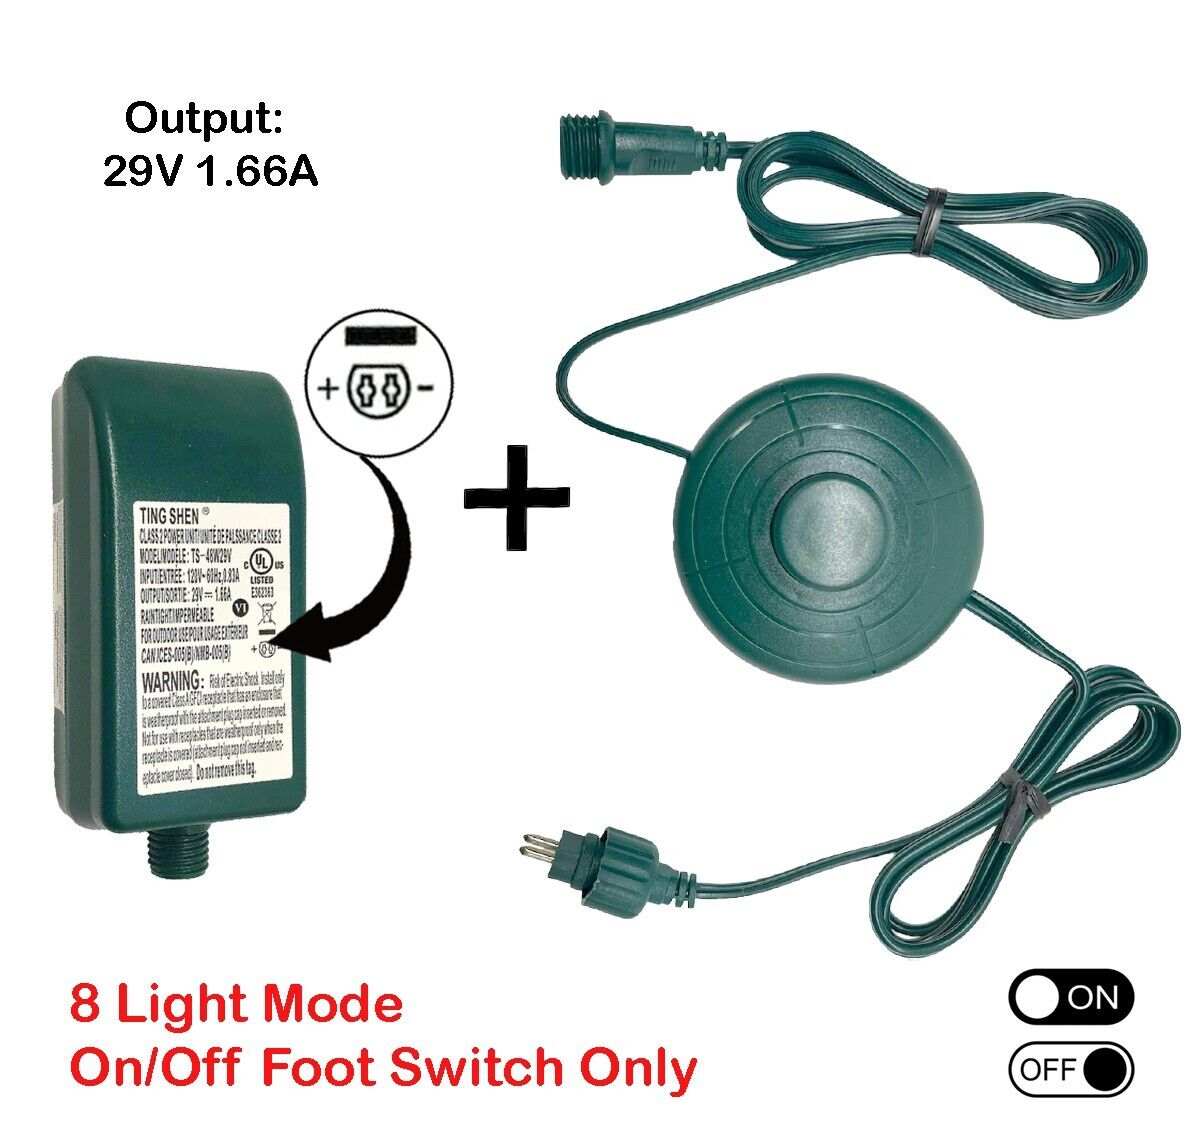 Set Adapter DC 29V 1.66A + Power Cord Foot Switch 1/2in Plug 6Ft - 8 LIGHT MODE